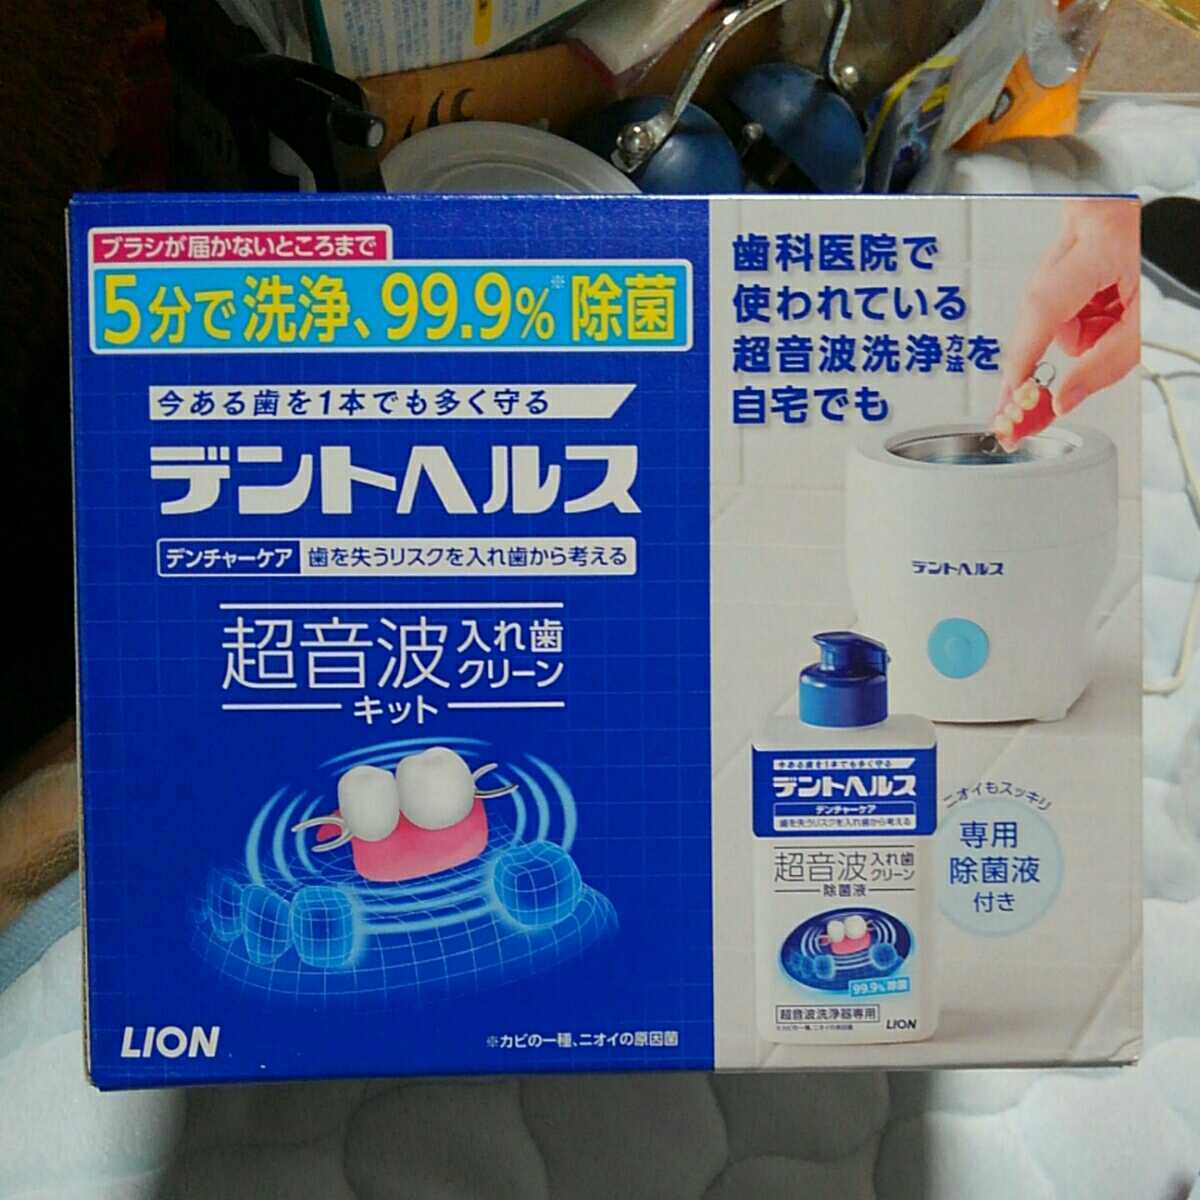 LION lion tento hell s ultrasound artificial tooth clean kit new goods unopened 5 minute . washing 99.9% bacteria elimination necklace and so on how about you? 